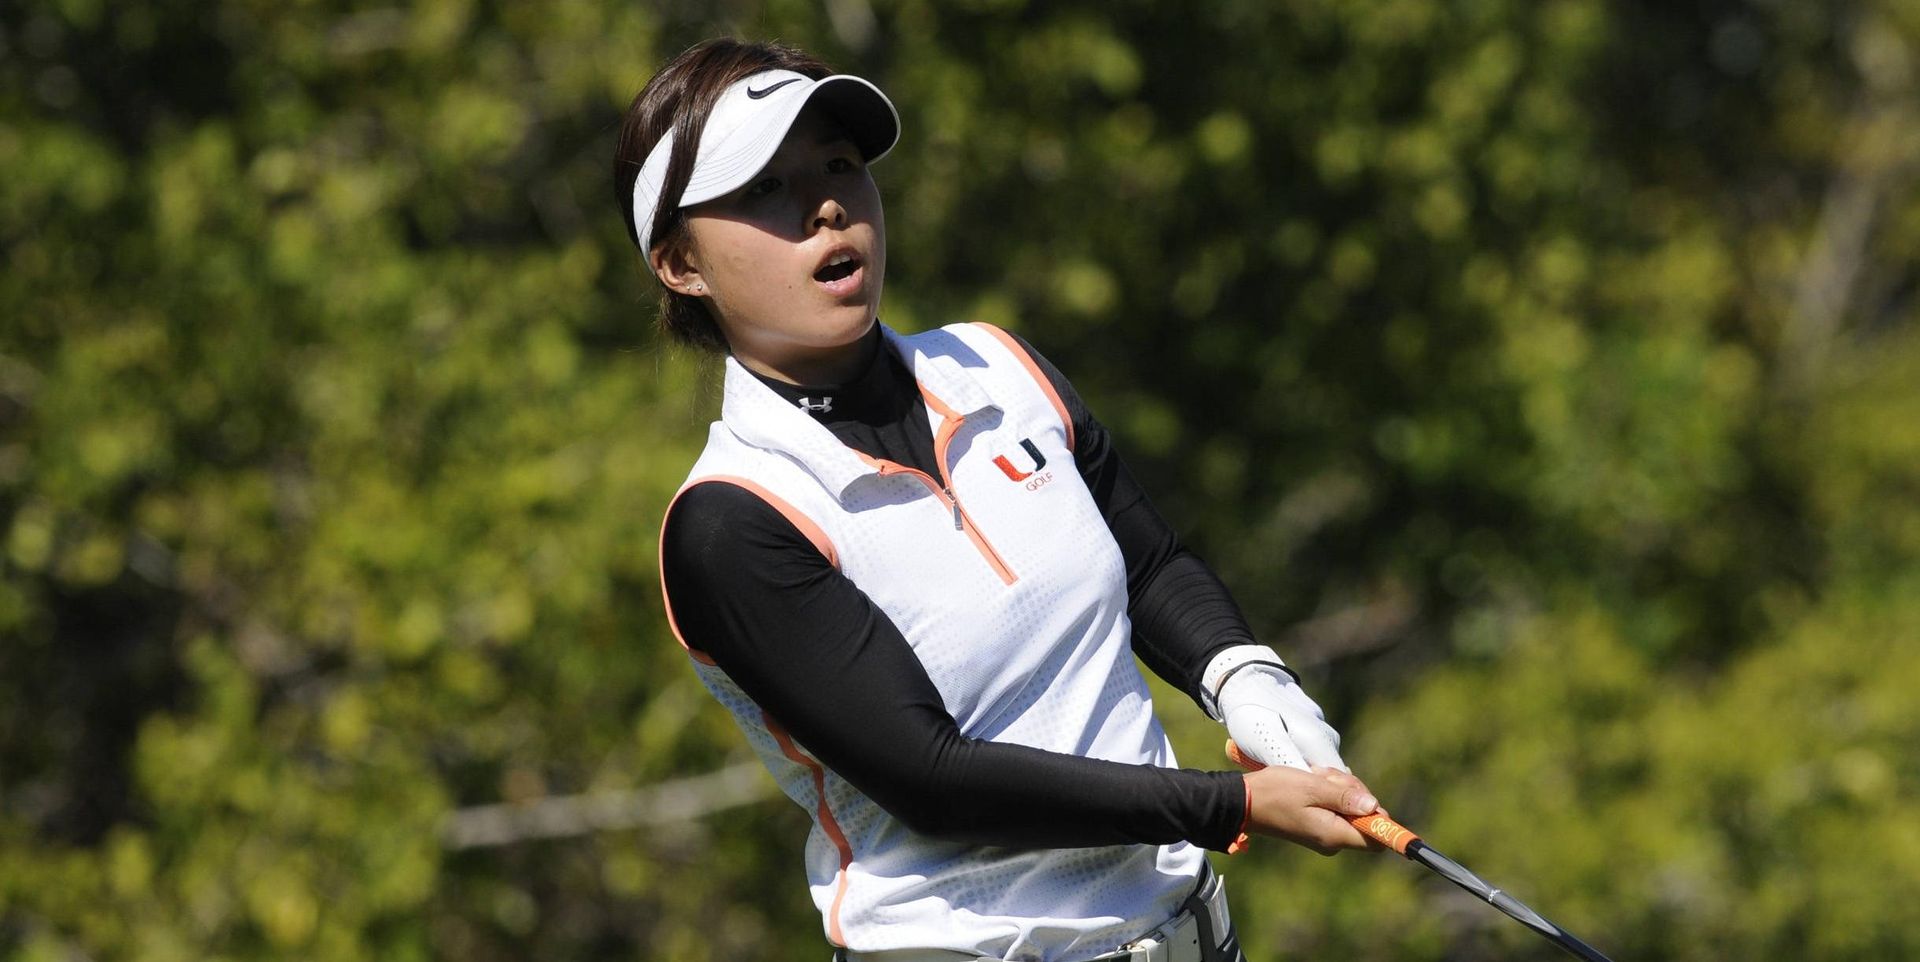 Park Moves Up to Seventh at Gator Invite